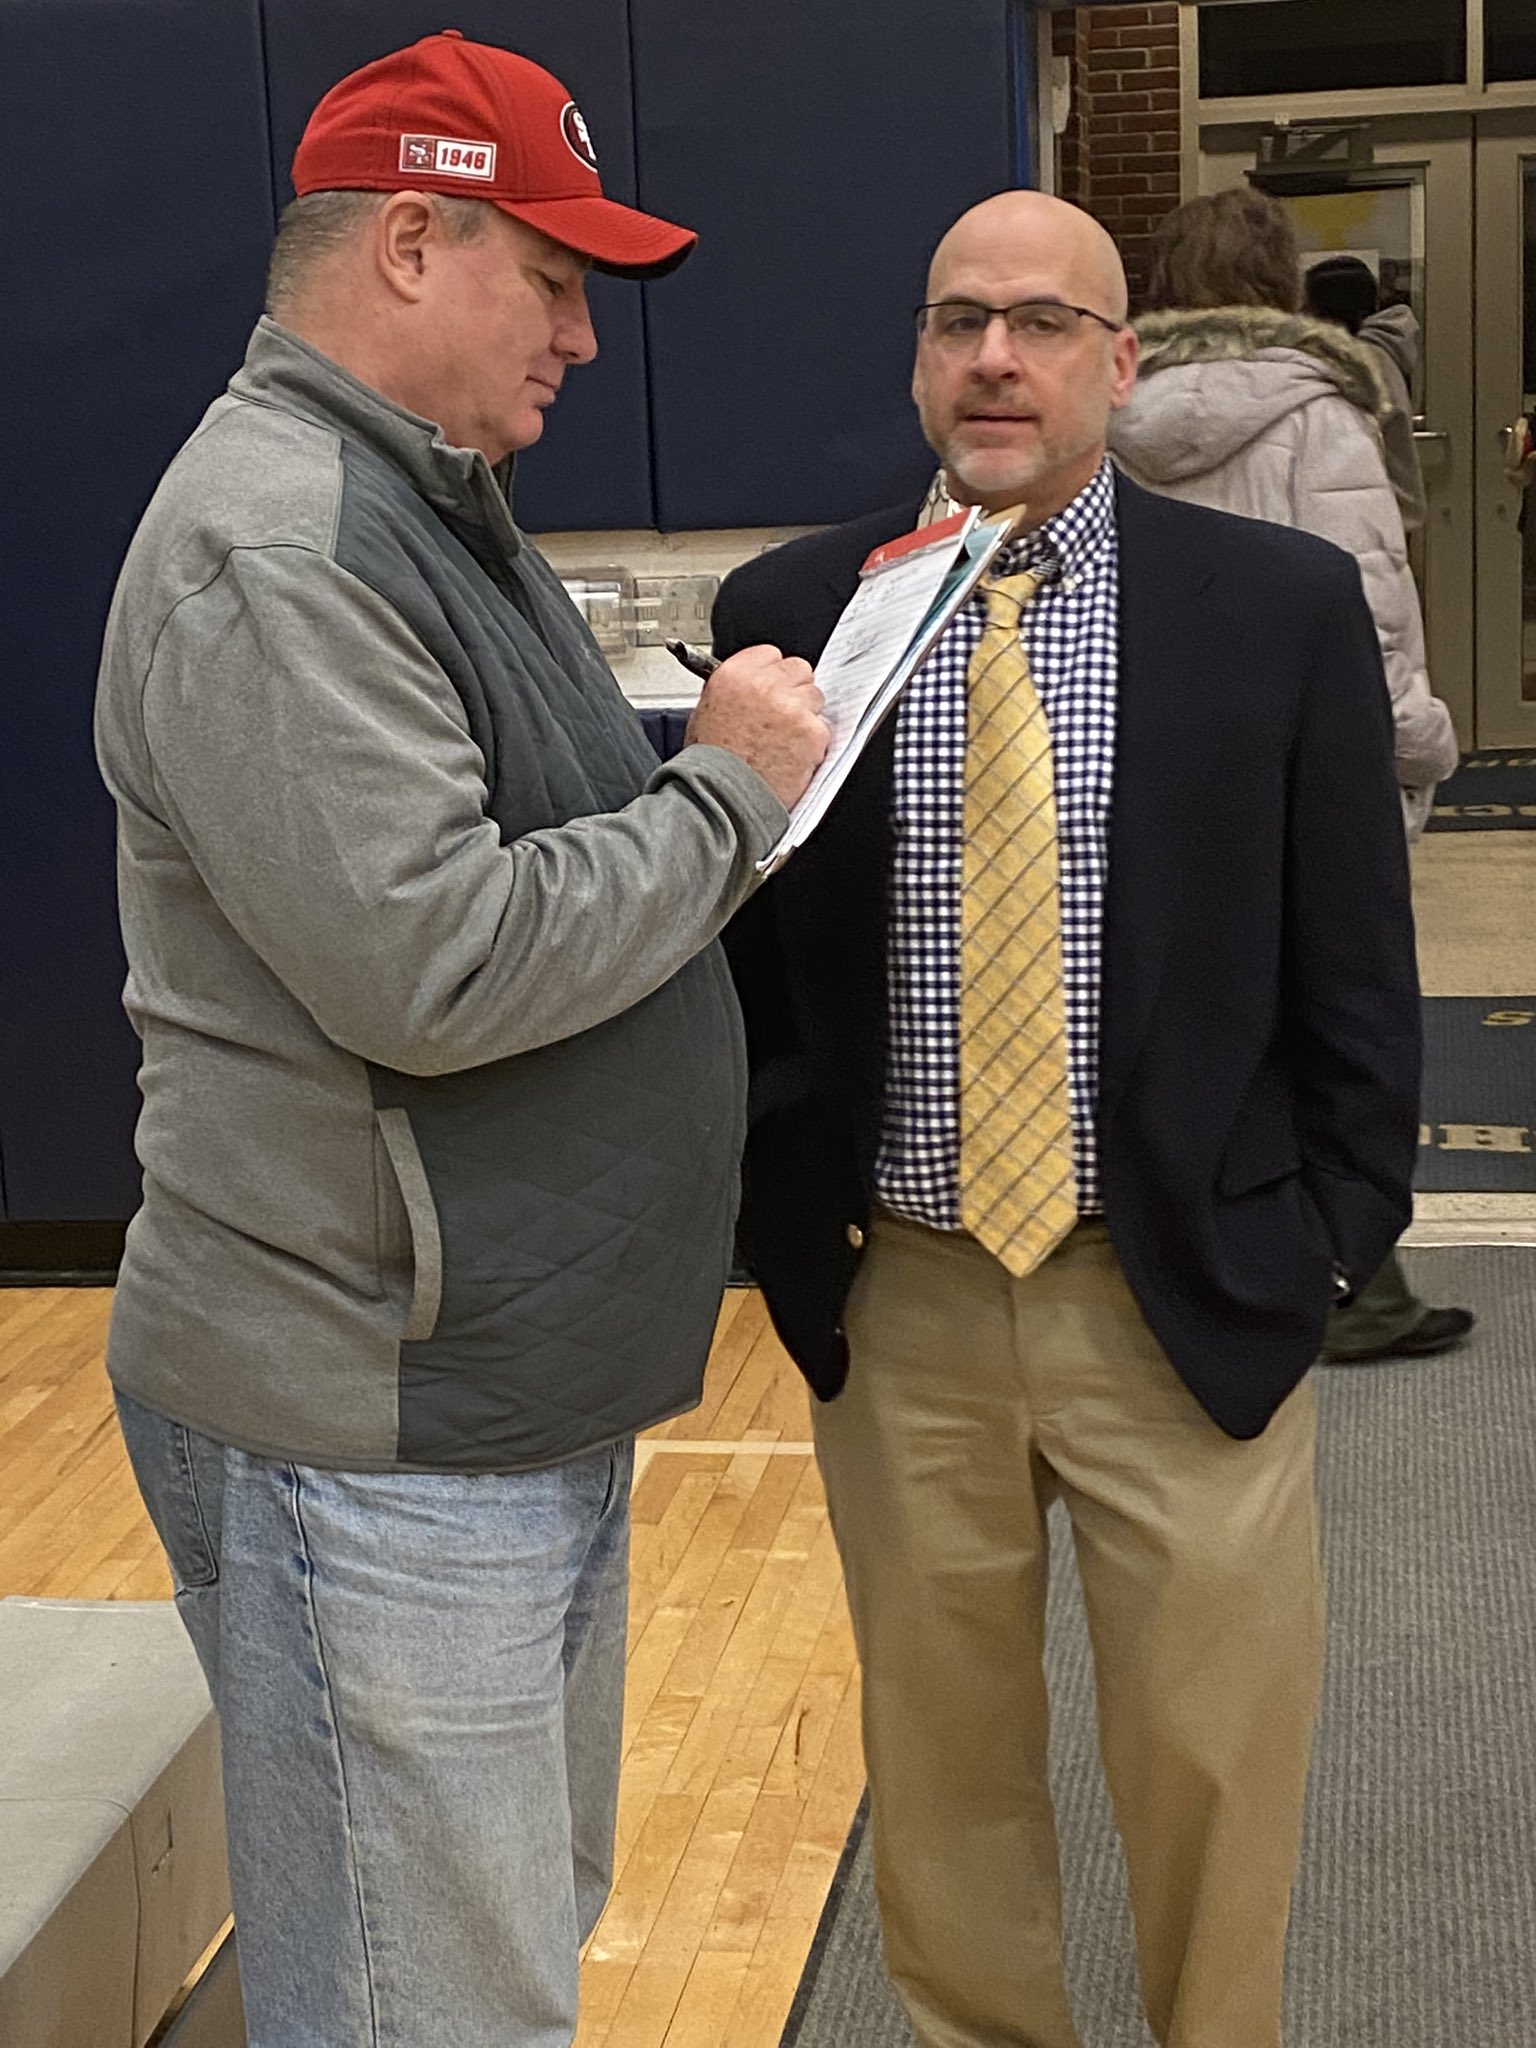 coach talks with a reporter